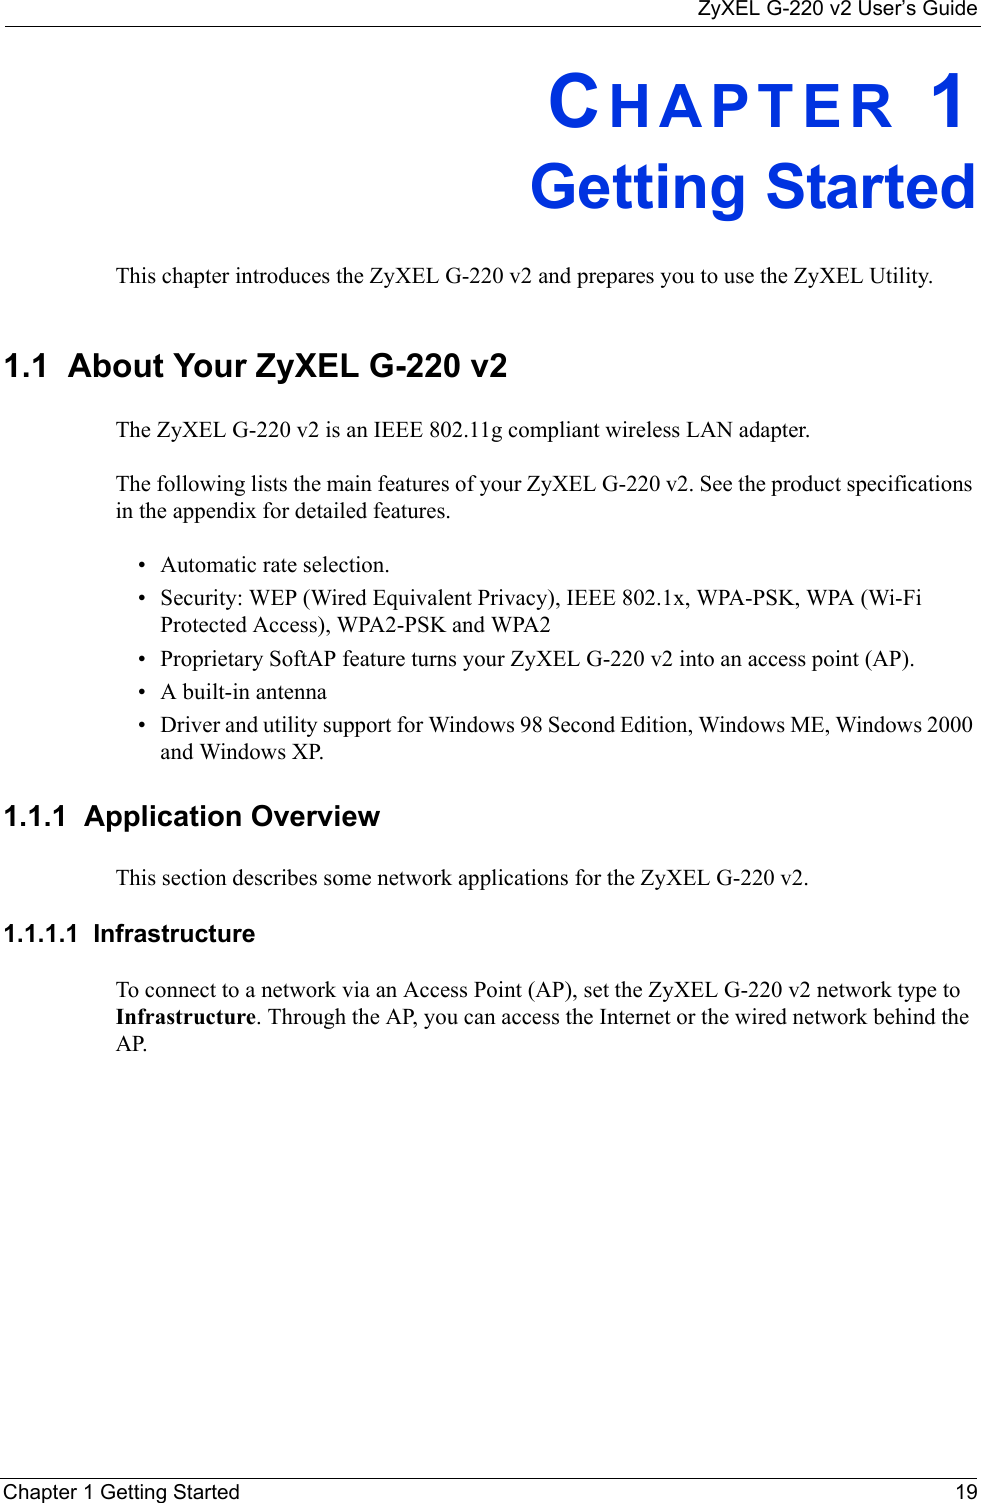 ZyXEL G-220 v2 User’s GuideChapter 1 Getting Started 19CHAPTER 1Getting StartedThis chapter introduces the ZyXEL G-220 v2 and prepares you to use the ZyXEL Utility.1.1  About Your ZyXEL G-220 v2    The ZyXEL G-220 v2 is an IEEE 802.11g compliant wireless LAN adapter. The following lists the main features of your ZyXEL G-220 v2. See the product specifications in the appendix for detailed features.• Automatic rate selection.• Security: WEP (Wired Equivalent Privacy), IEEE 802.1x, WPA-PSK, WPA (Wi-Fi Protected Access), WPA2-PSK and WPA2 • Proprietary SoftAP feature turns your ZyXEL G-220 v2 into an access point (AP).• A built-in antenna• Driver and utility support for Windows 98 Second Edition, Windows ME, Windows 2000 and Windows XP.1.1.1  Application OverviewThis section describes some network applications for the ZyXEL G-220 v2. 1.1.1.1  Infrastructure To connect to a network via an Access Point (AP), set the ZyXEL G-220 v2 network type to Infrastructure. Through the AP, you can access the Internet or the wired network behind the AP.  